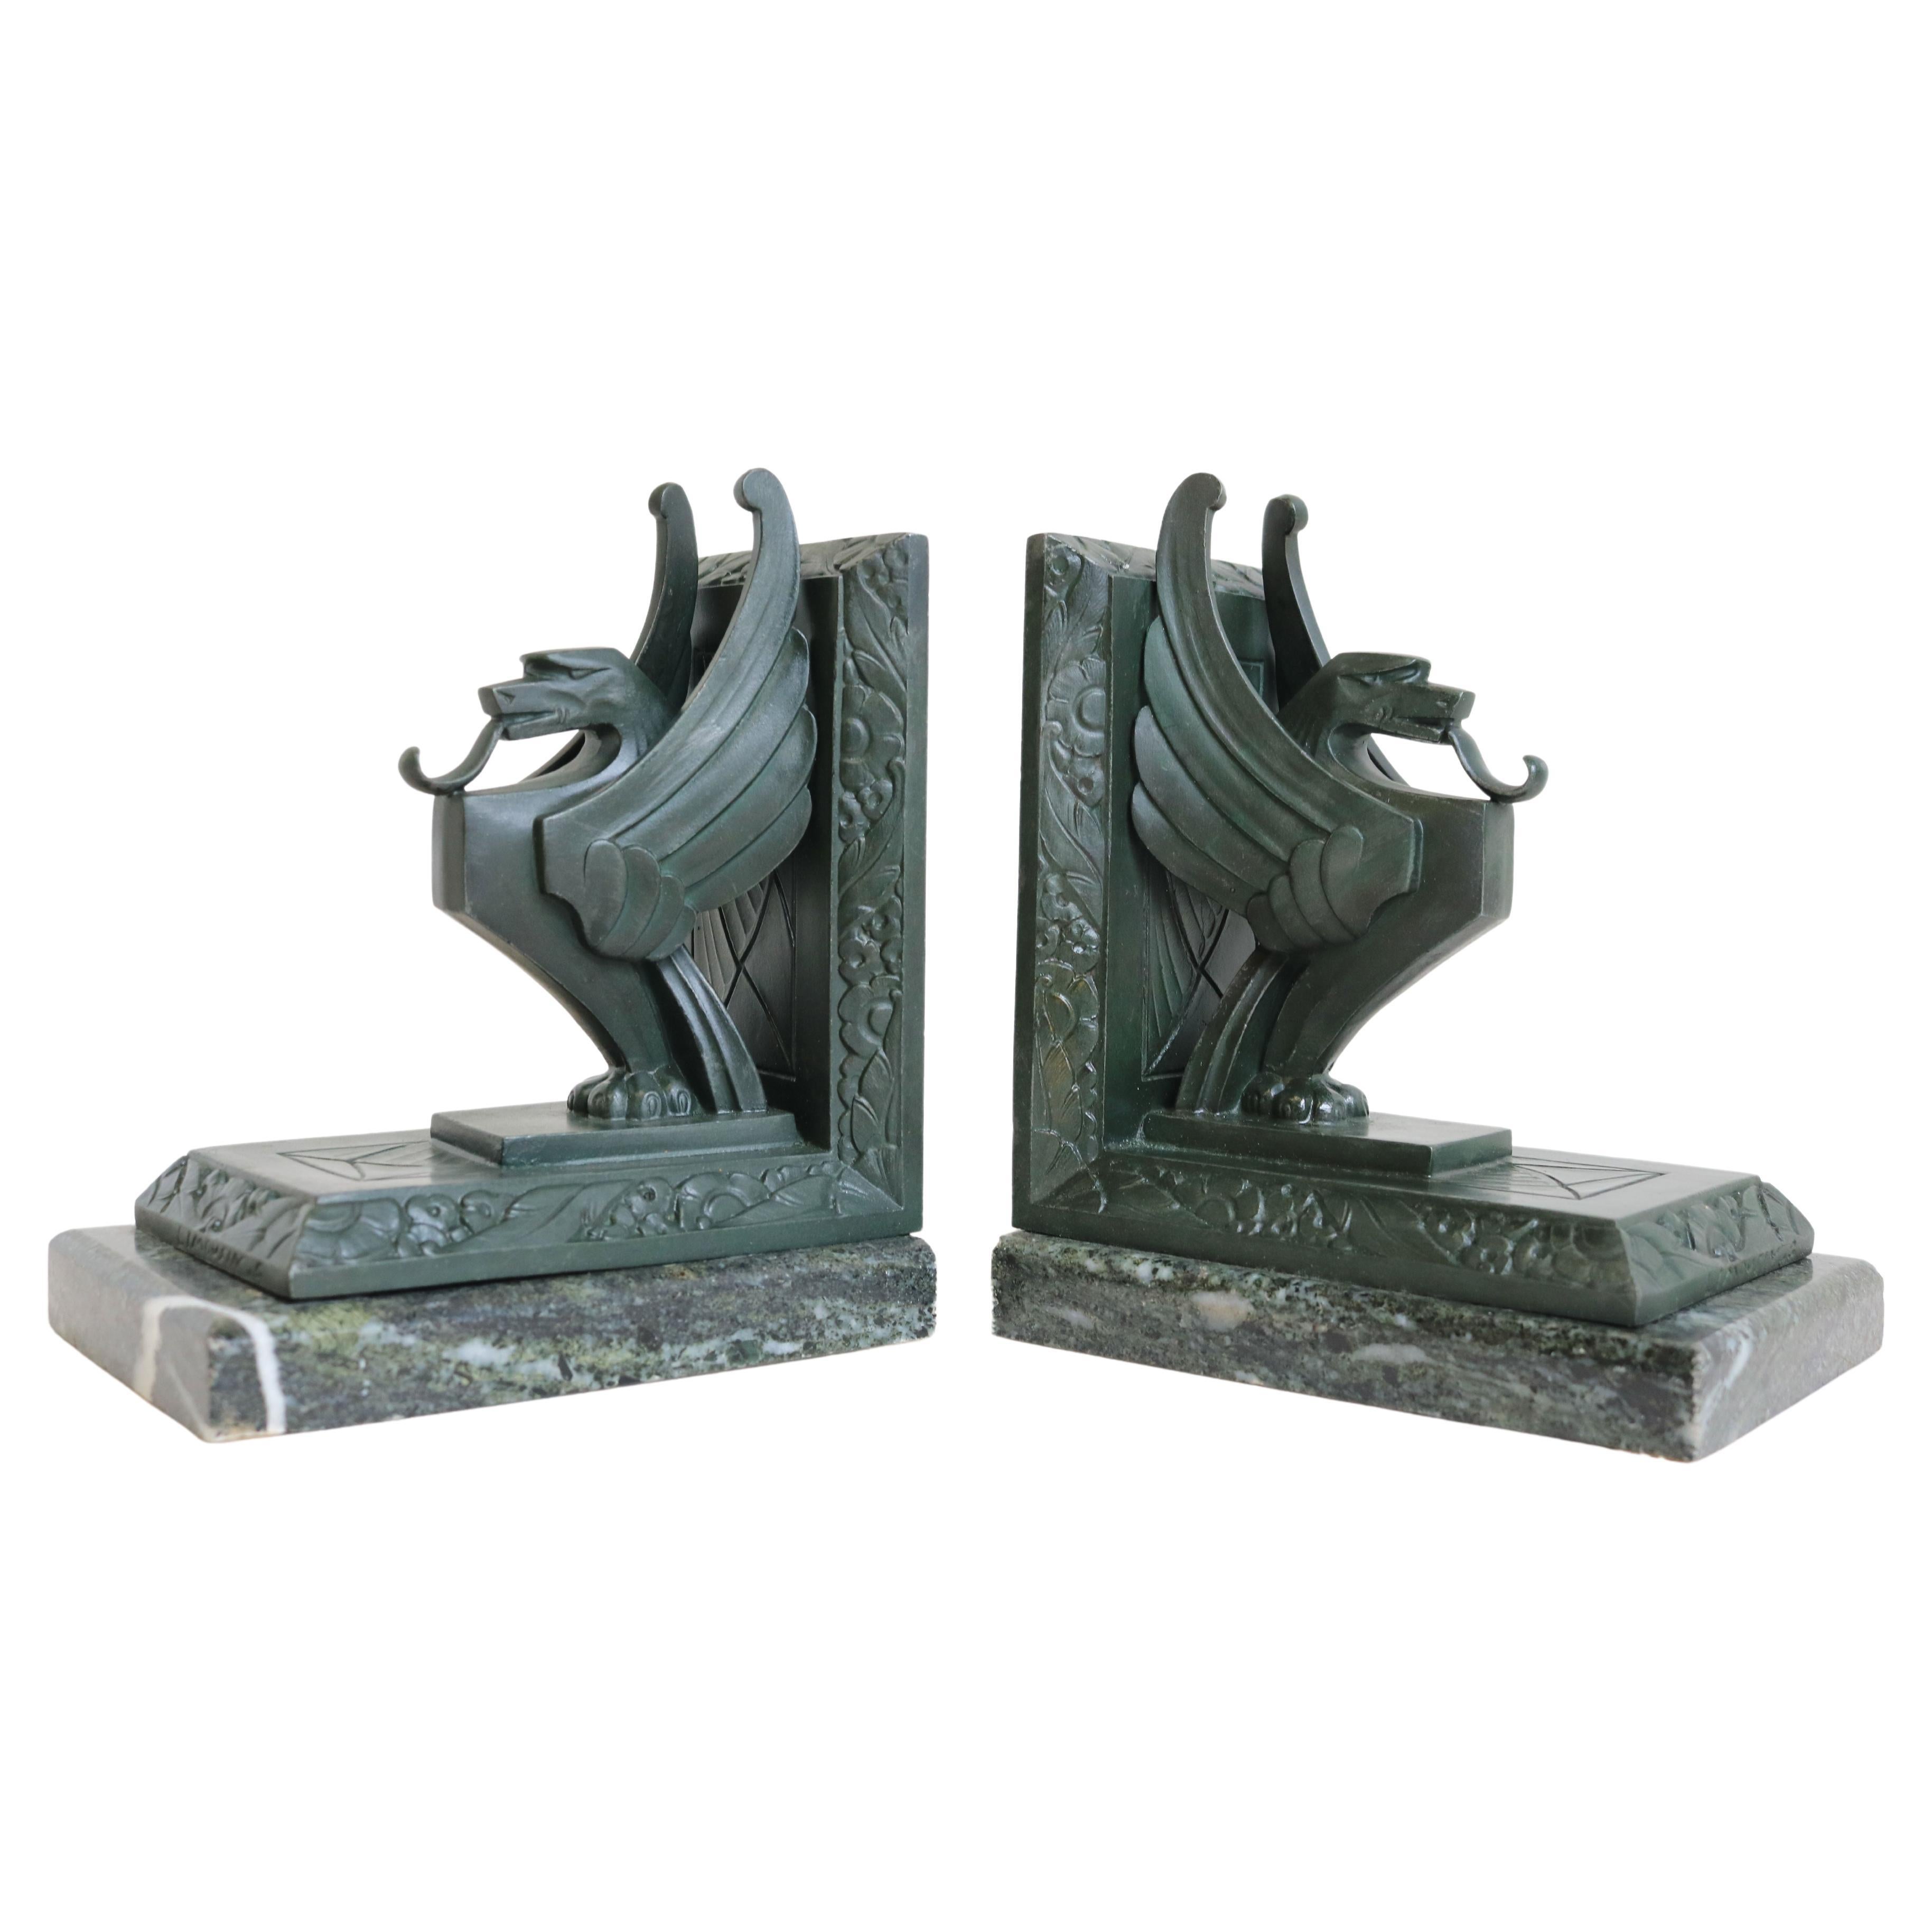 Antique French Art Deco Bookends “Griffins” by Limousin France 1930 Green Marble